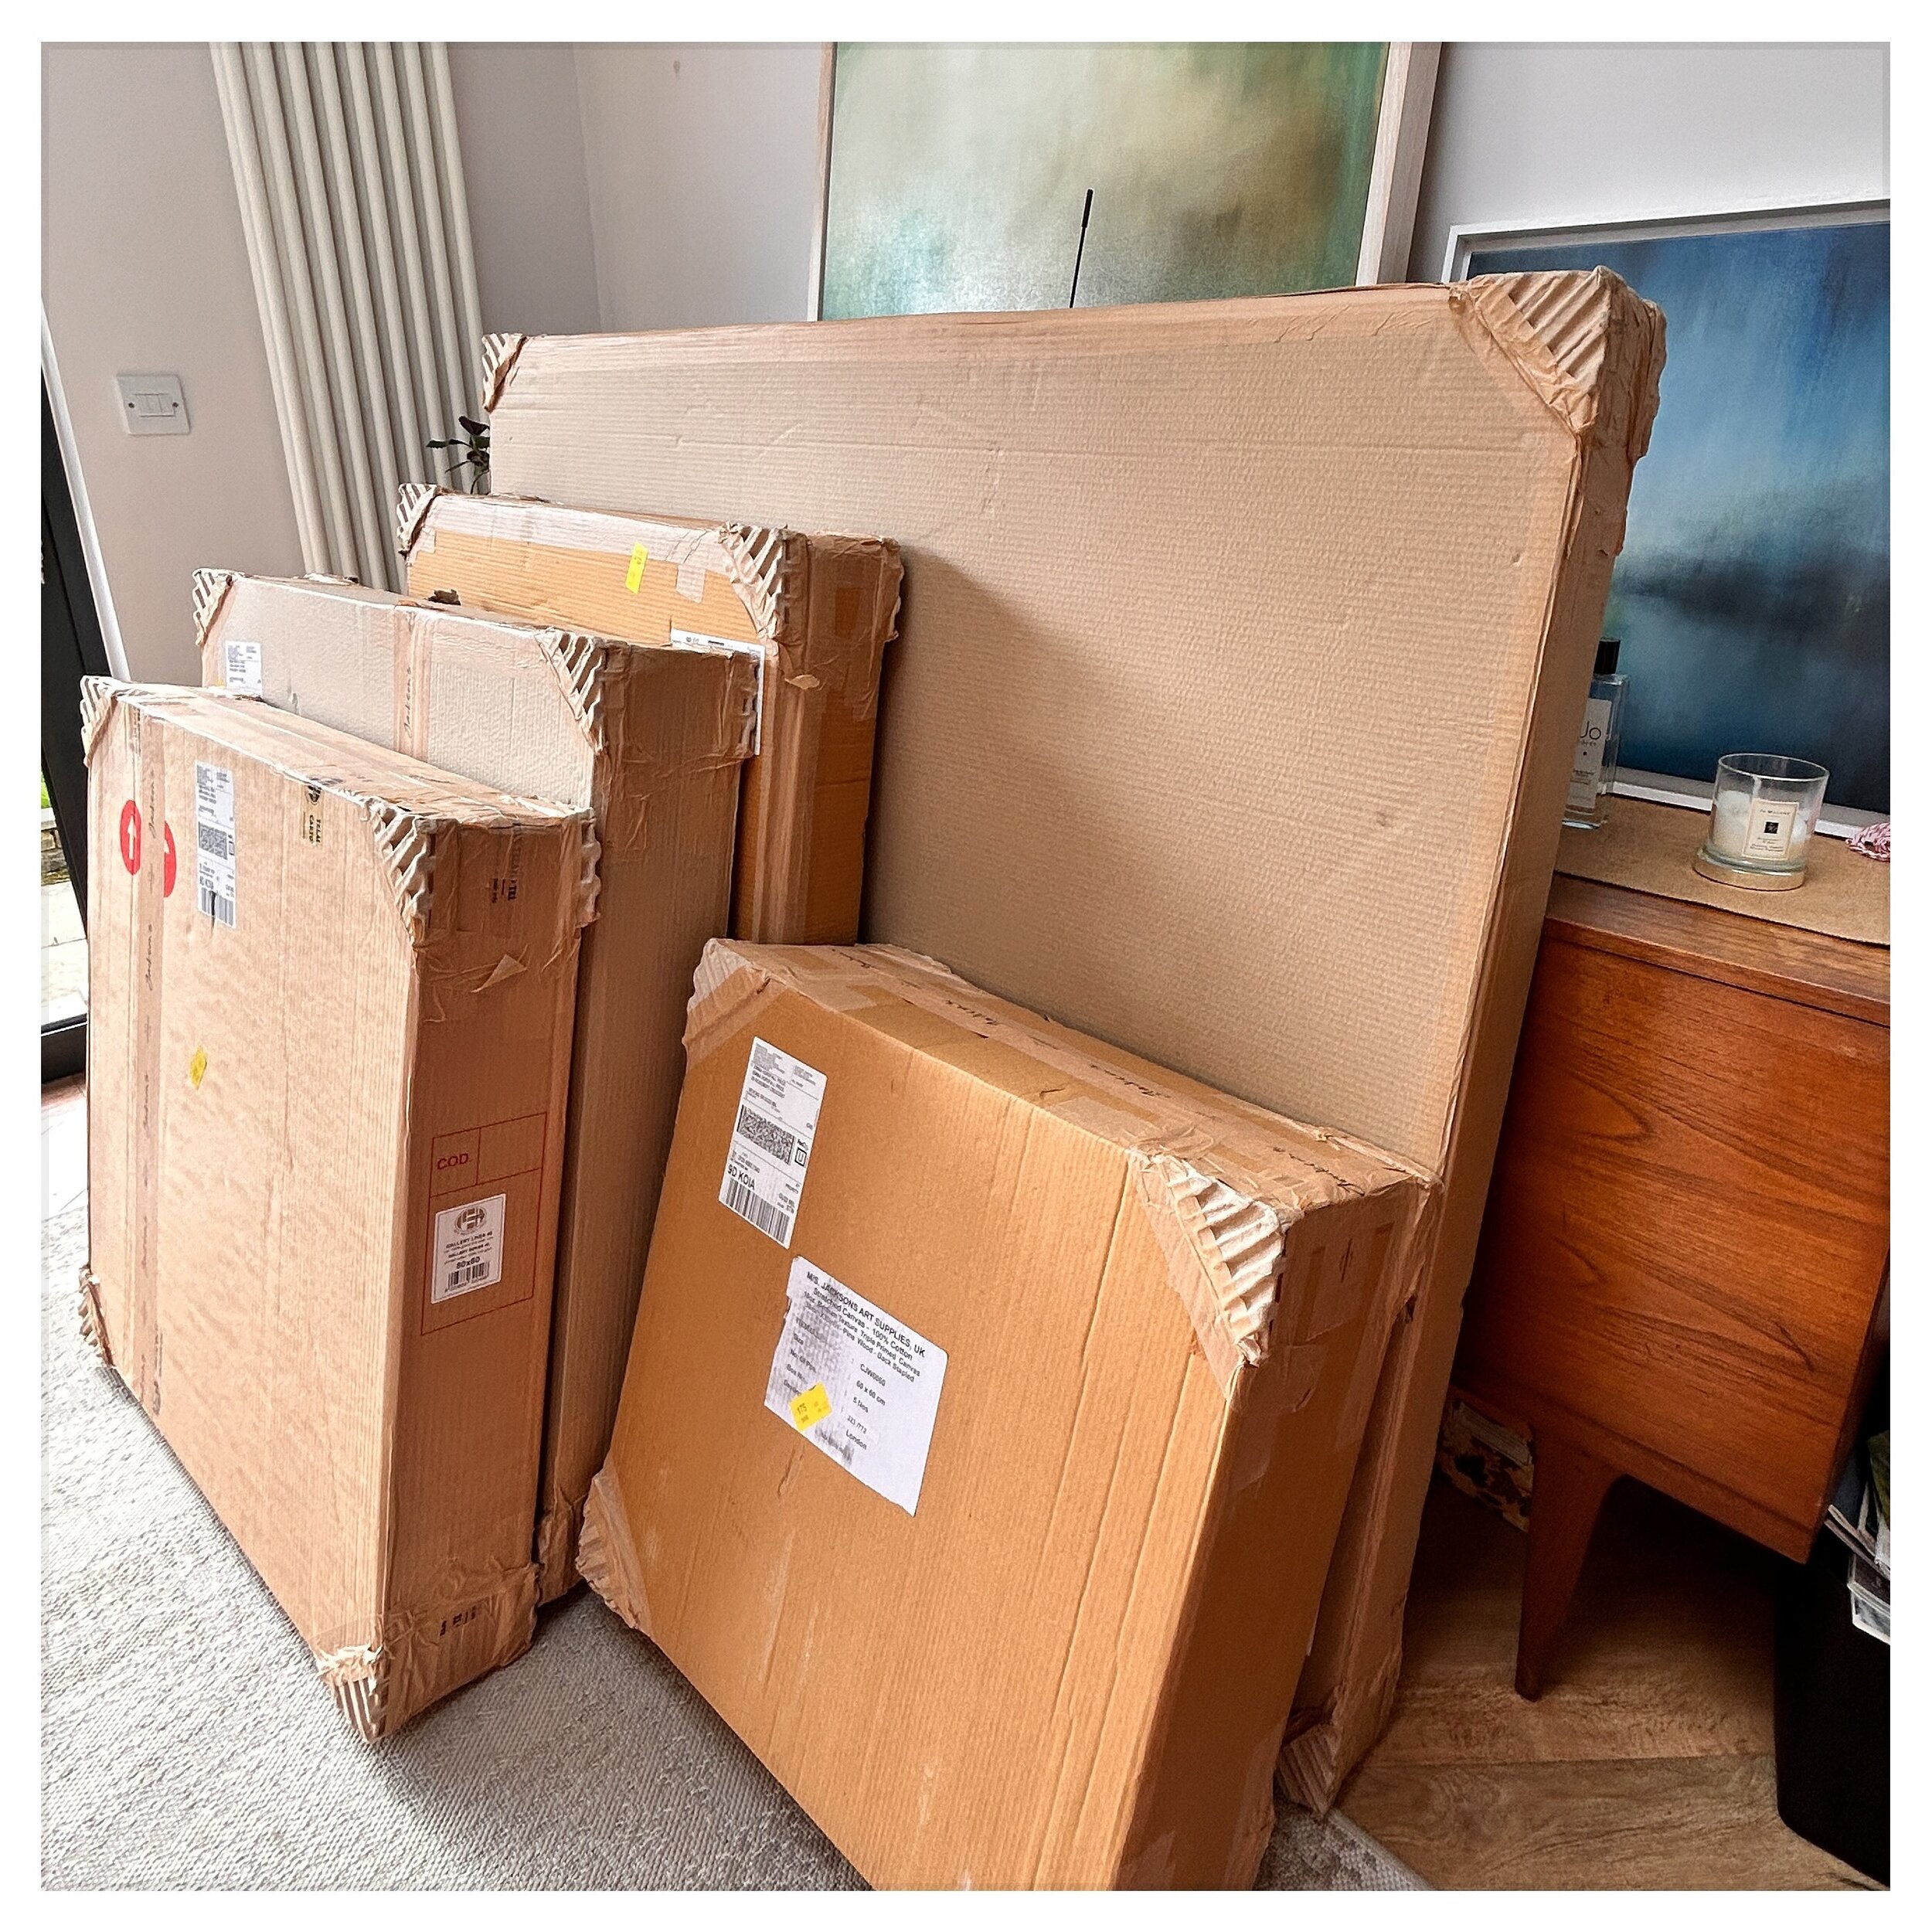 Excited!!
When your Sunday evening online shop arrives 😳🤣 thanks @jacksons_art

~ 14 canvases, and those beasts at the back,120 x 150cm, are much much, much bigger than anything I&rsquo;ve worked on previously! Embrace the fear 🙌
No excuses now &h